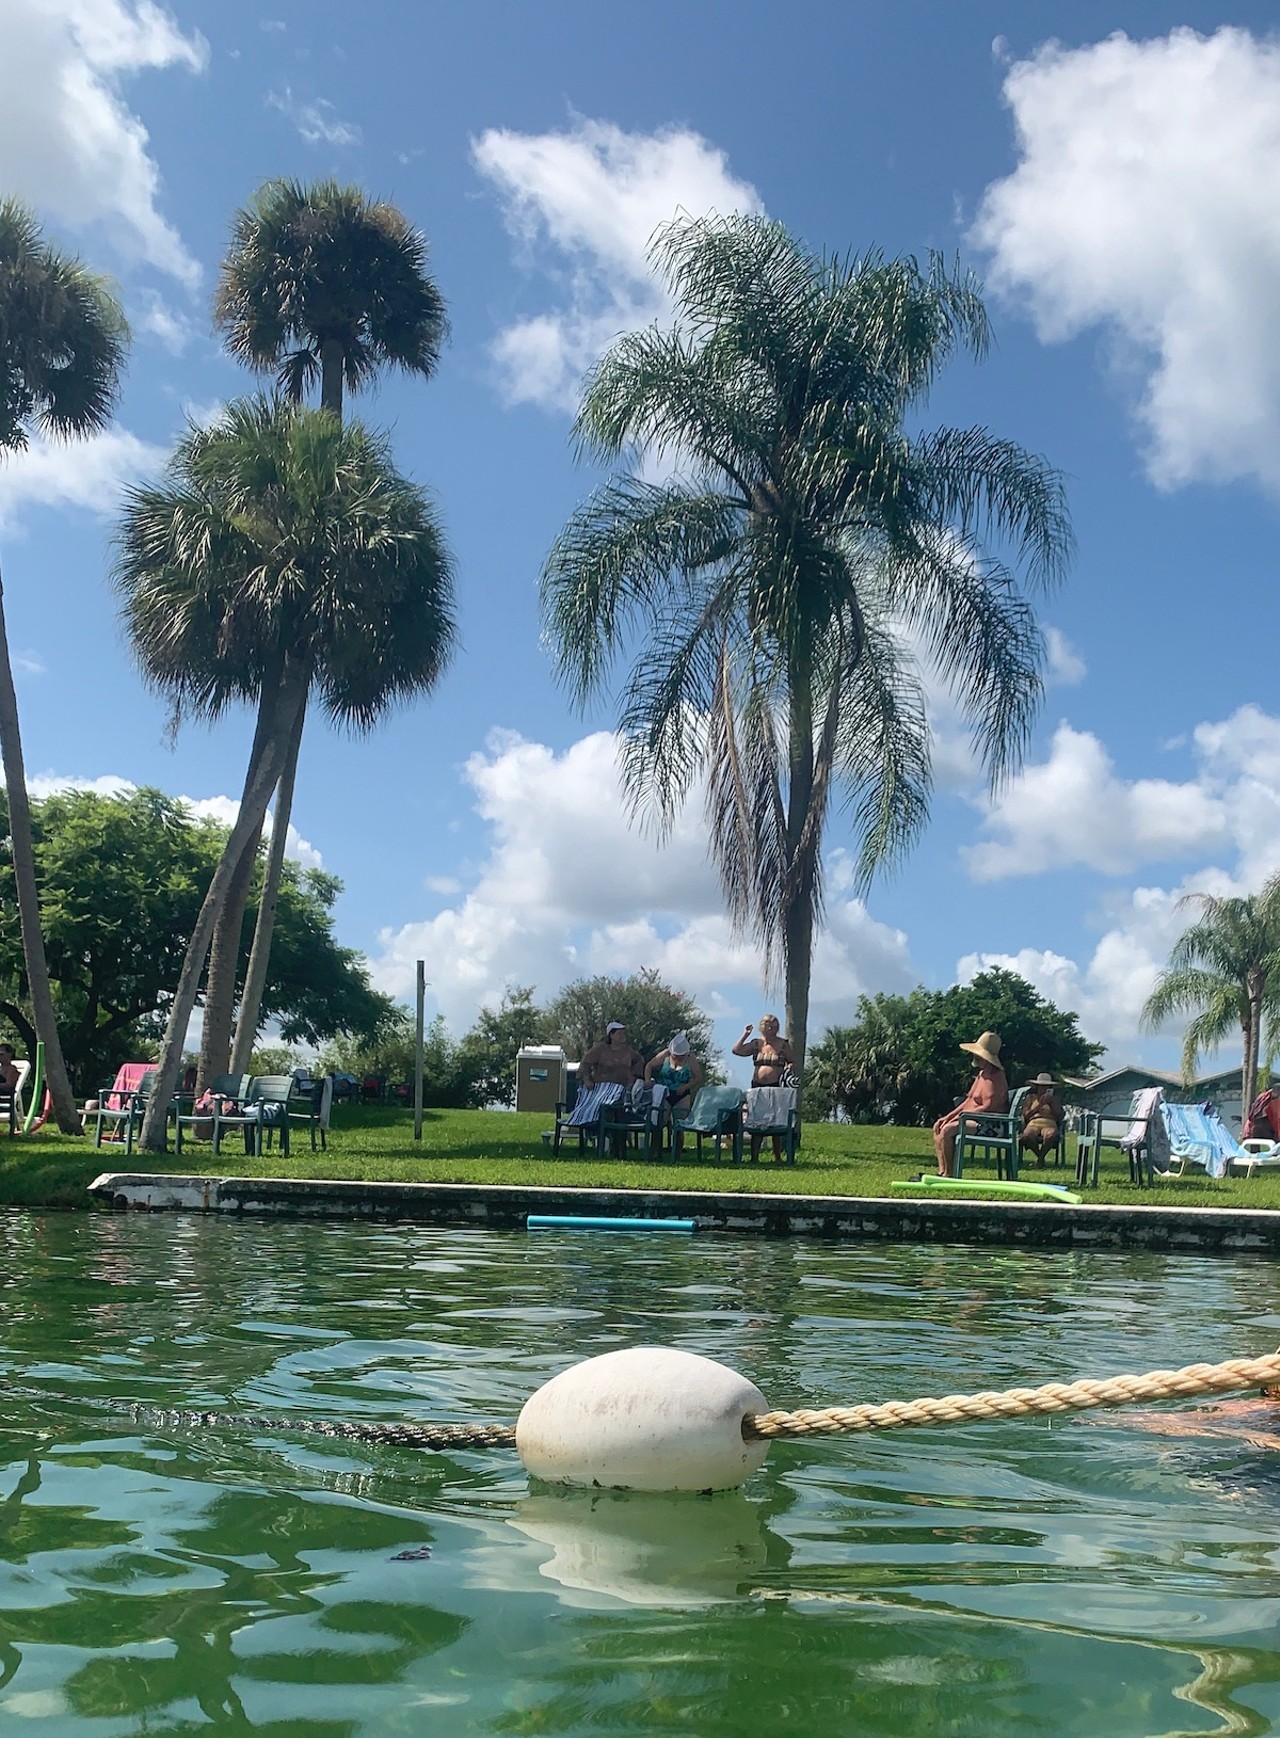 Take the healing waters in North Port12200 San Servando Ave., North Port. (941) 426-1692
Bring a noodle with you to Warm Mineral Springs, and plan to spend a few hours floating and absorbing all the minerals from this prehistoric sinkhole. It draws people from all over the world.